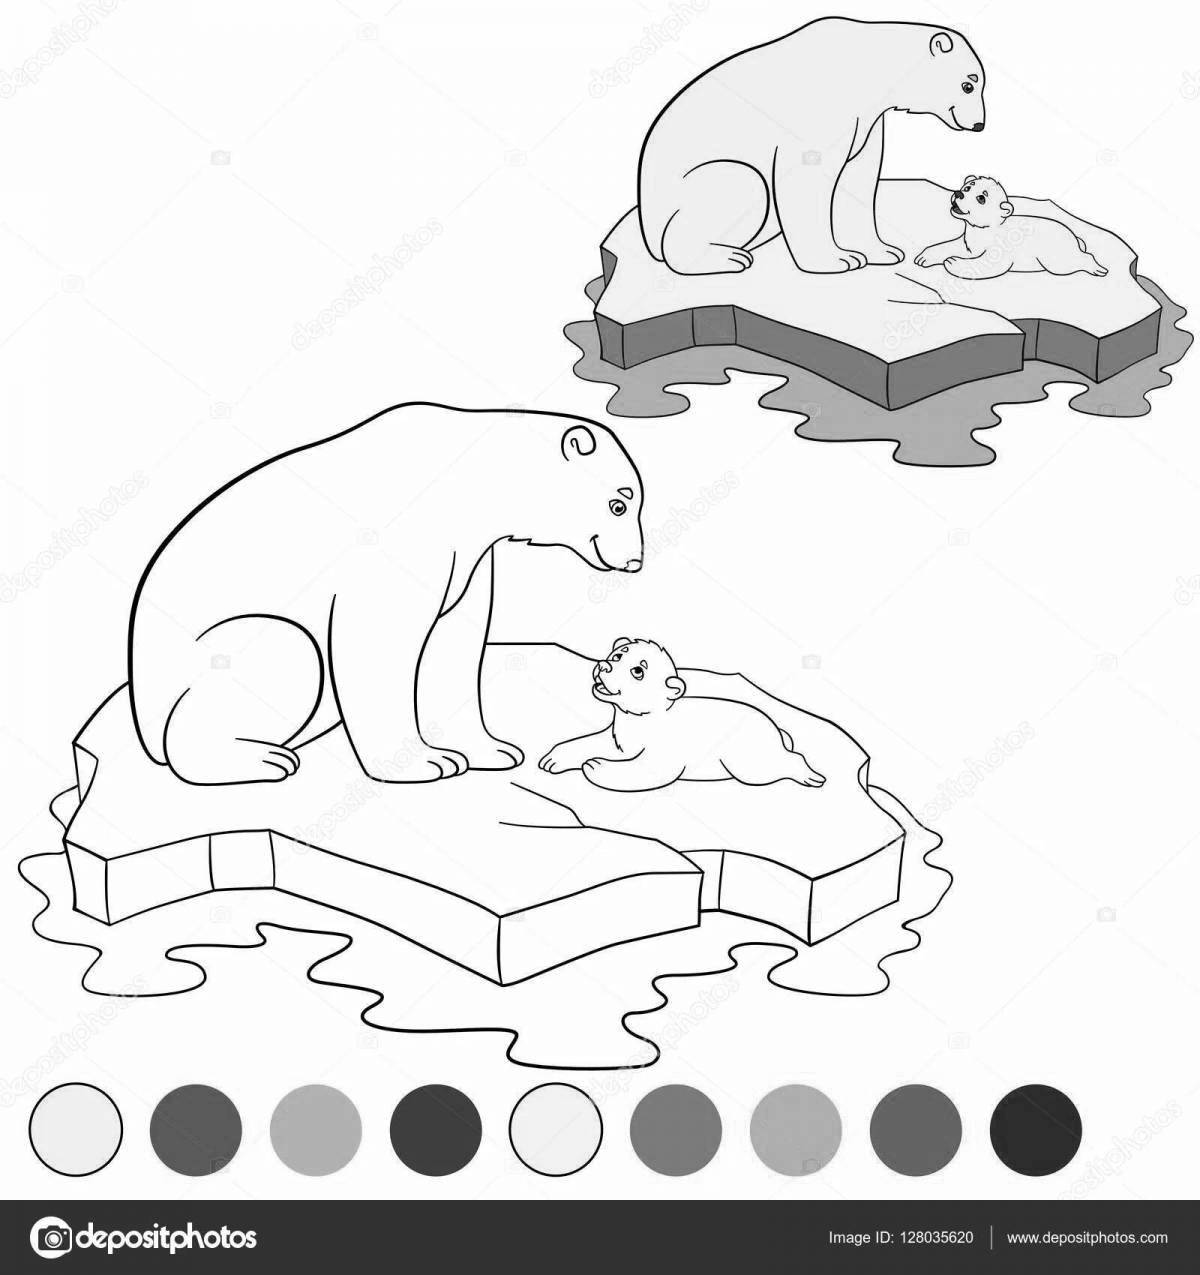 Bright ice floe coloring for children